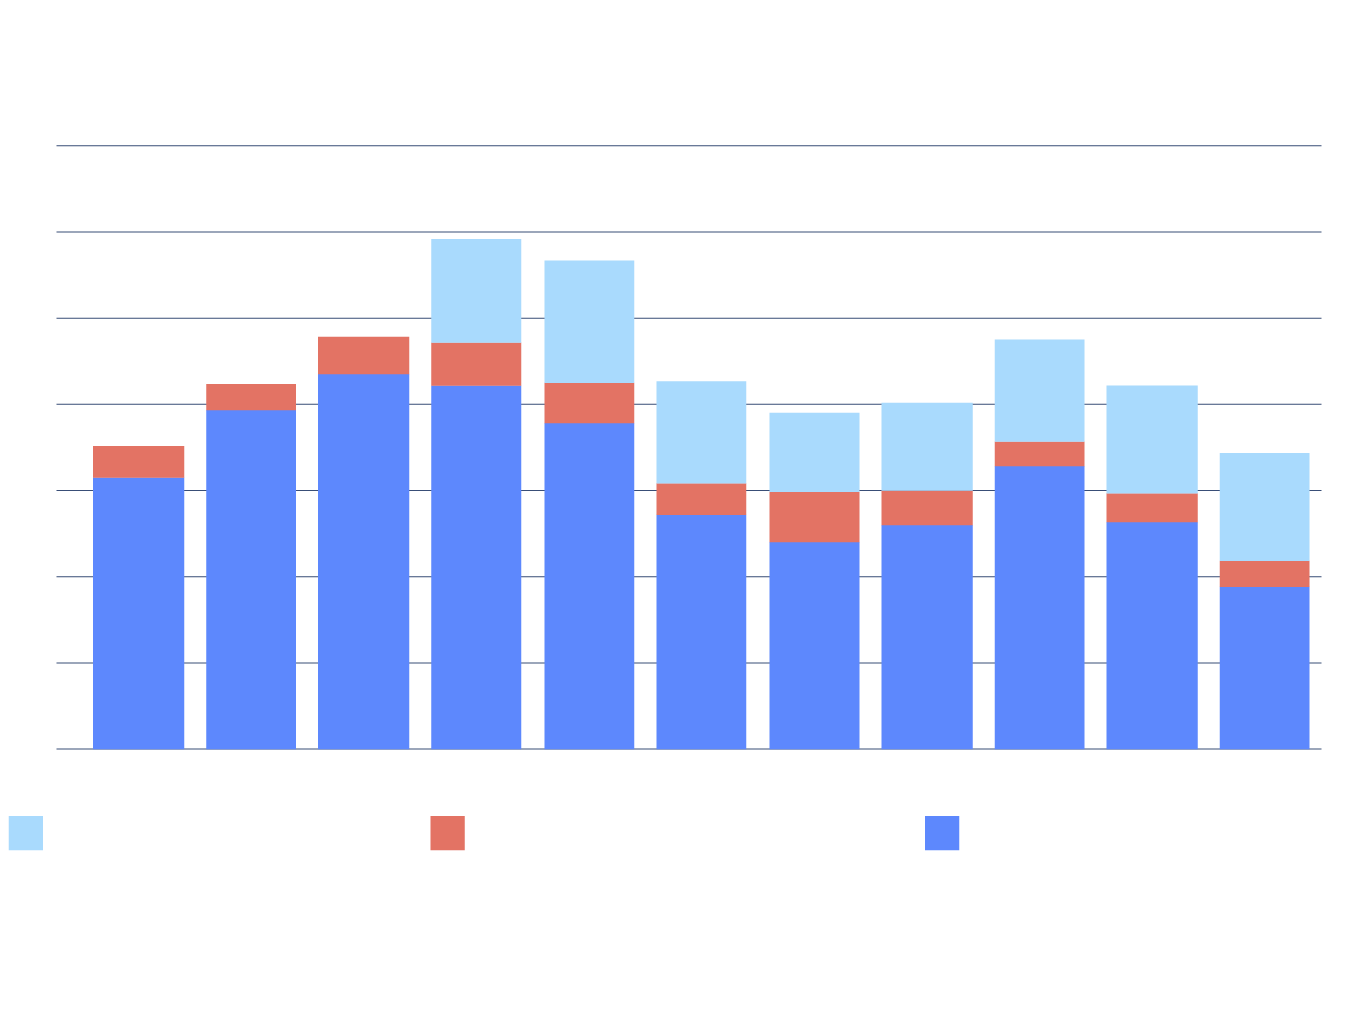 Breakdown of sources of public financing for fossil fuels